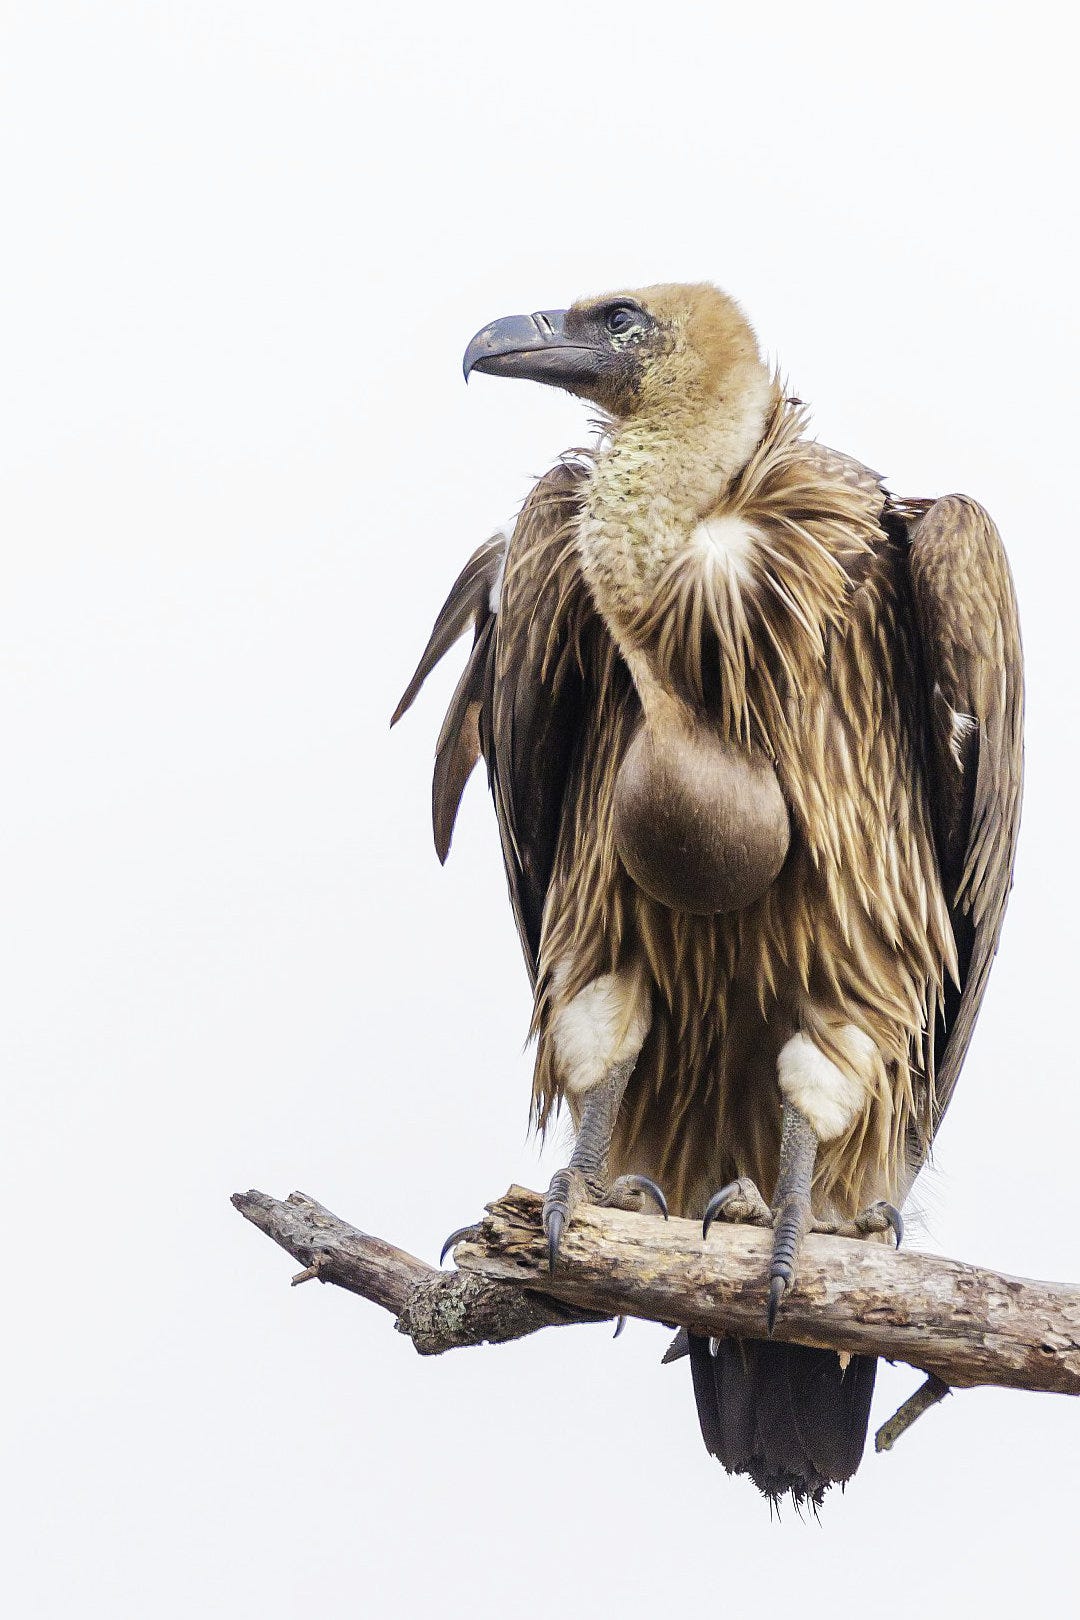 A white-backed vulture perches on a horizontal dead branch against a cloud-covered grey-white sky, head turned in profile. Its beak is huge, black, and downcurved into a wicked point; most of its head and neck are covered with short tan down like fuzzy fur. Each breast feather is individually shaded from a beige center to dark brown edges, and the dark unfeathered crop at the base of its neck is visibly distended from a recent meal. 